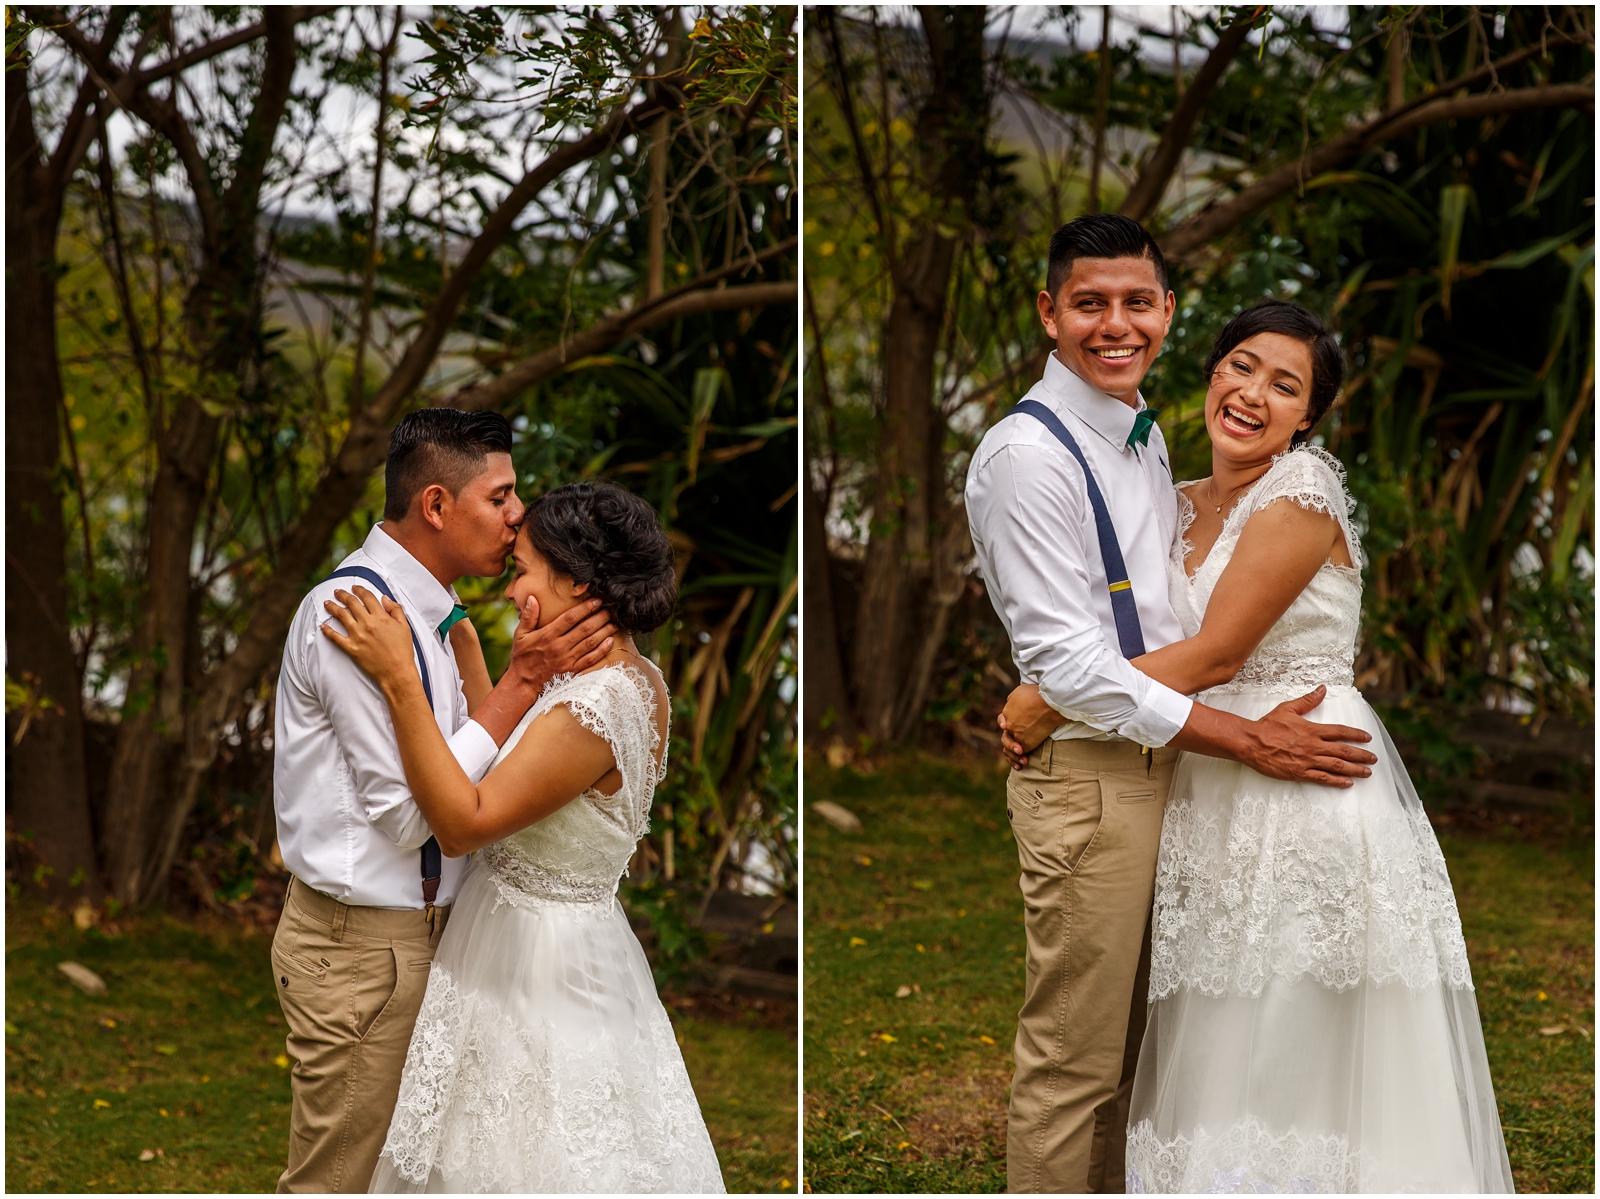 This couple enjoying the tropical forest on their wedding day in Nicaragua.